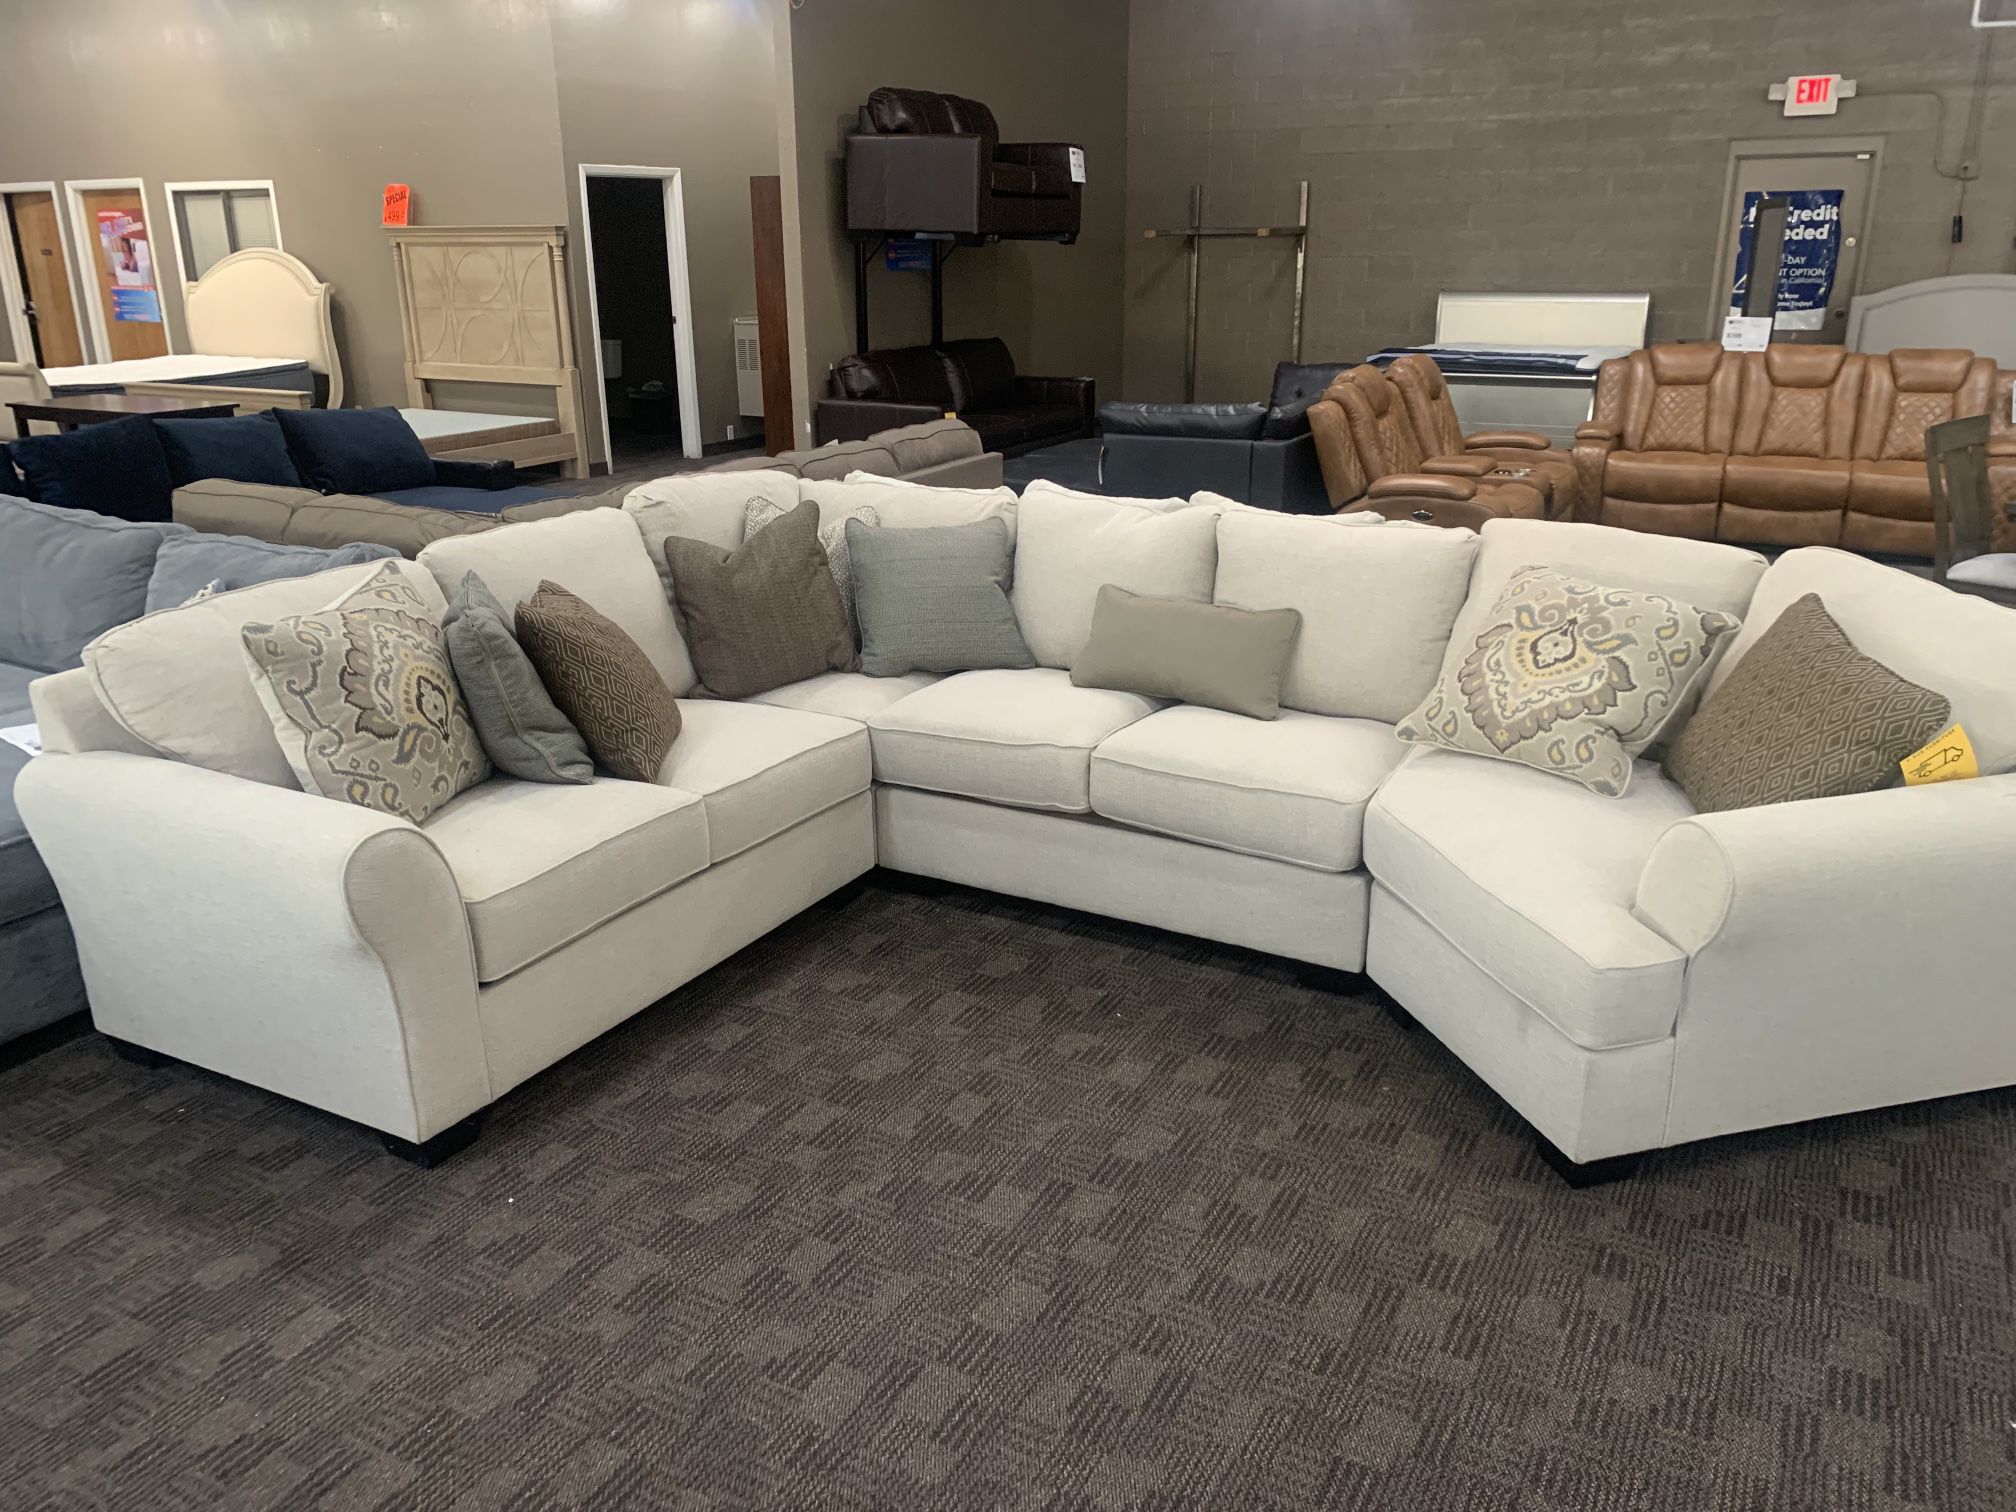 Cream Beige Large Sectional Couch